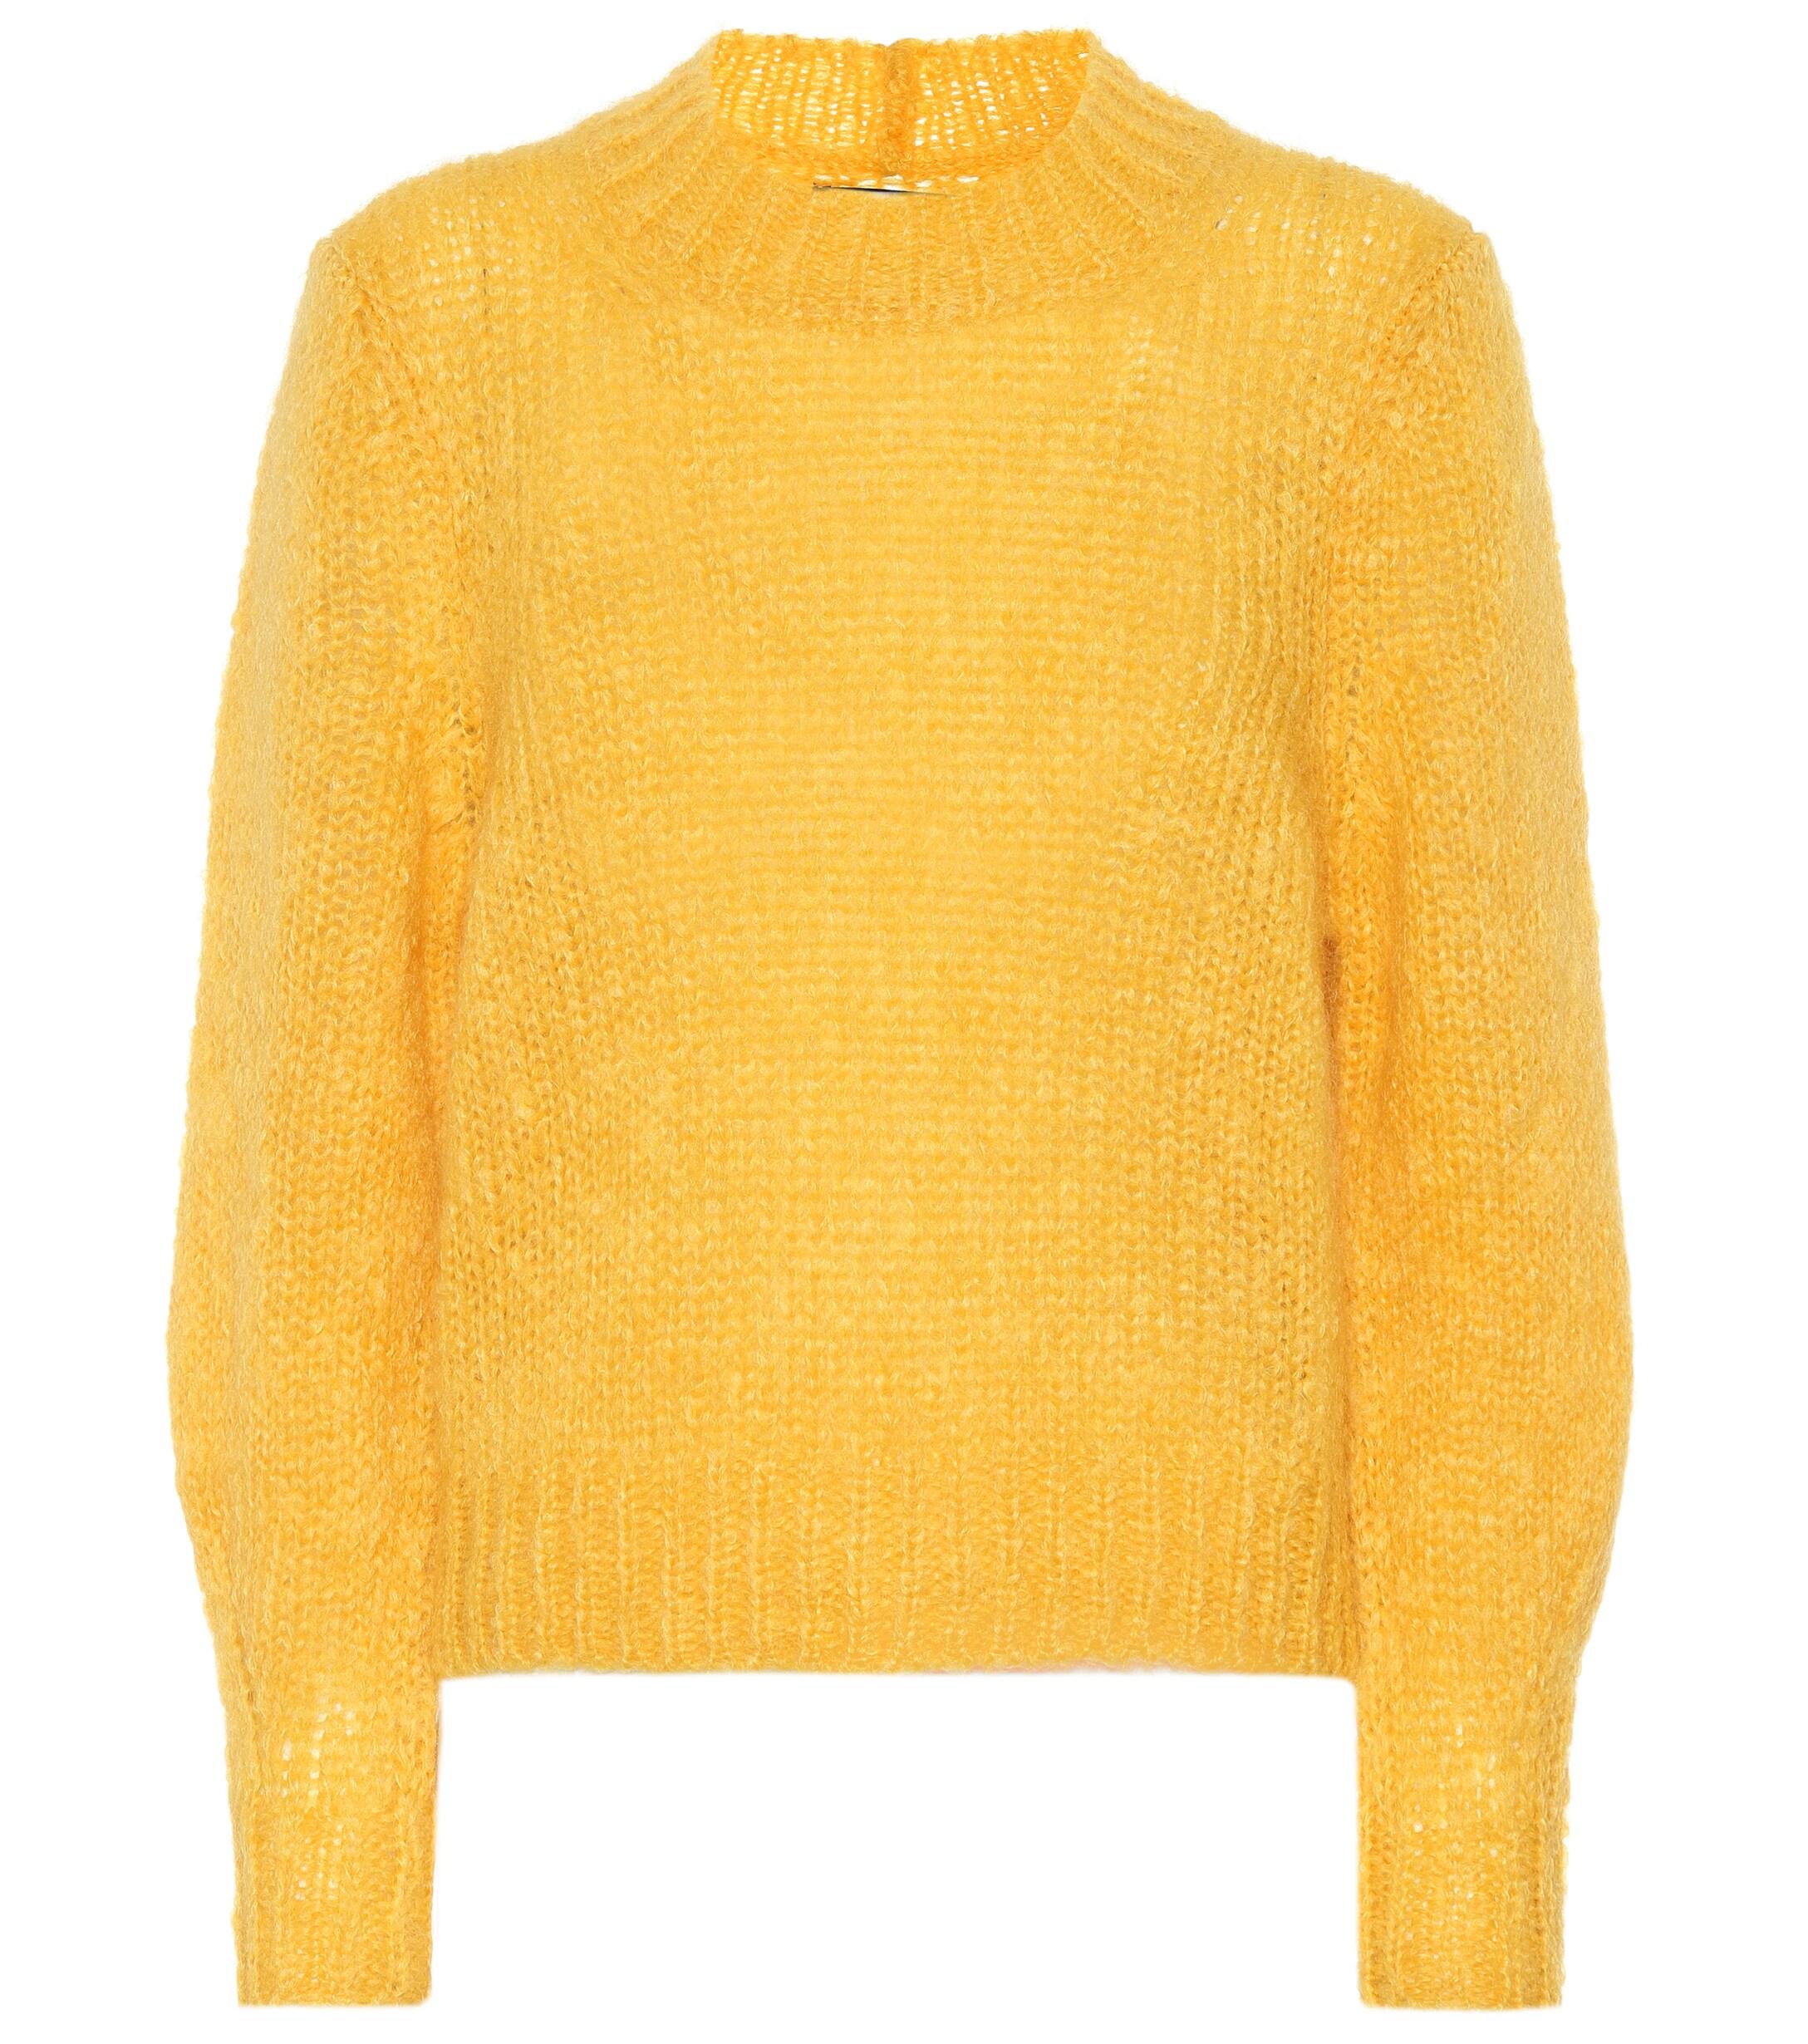 Isabel Marant Ivah Mohair And Wool-blend Sweater in Yellow - Lyst